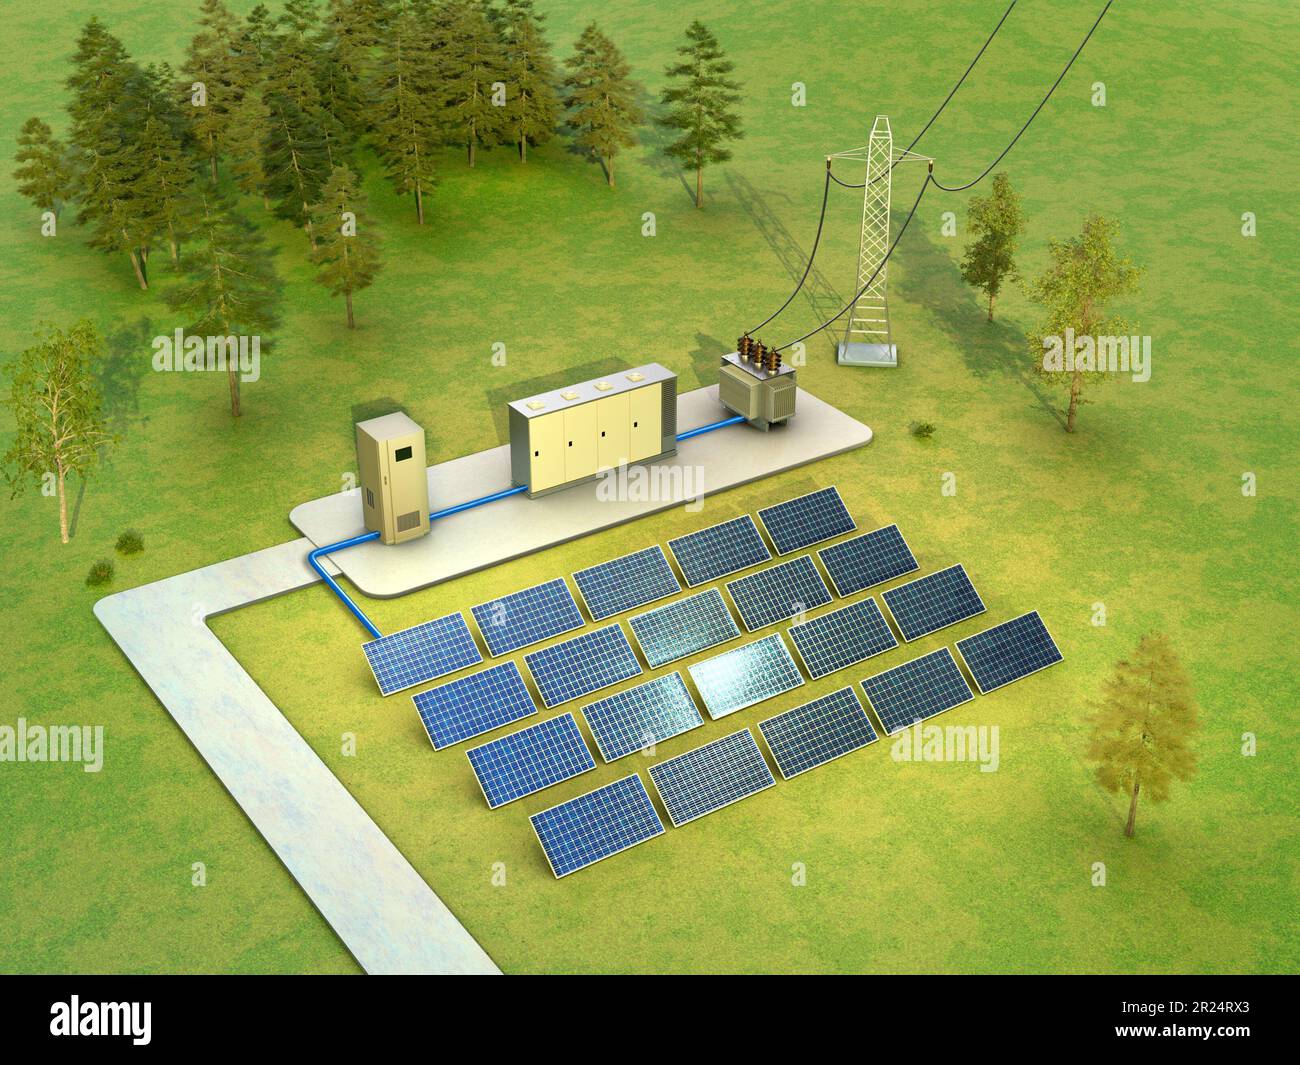 Solar power plant schematic including an inverter, battery and transformer. Digital illustration, 3D render. Stock Photo